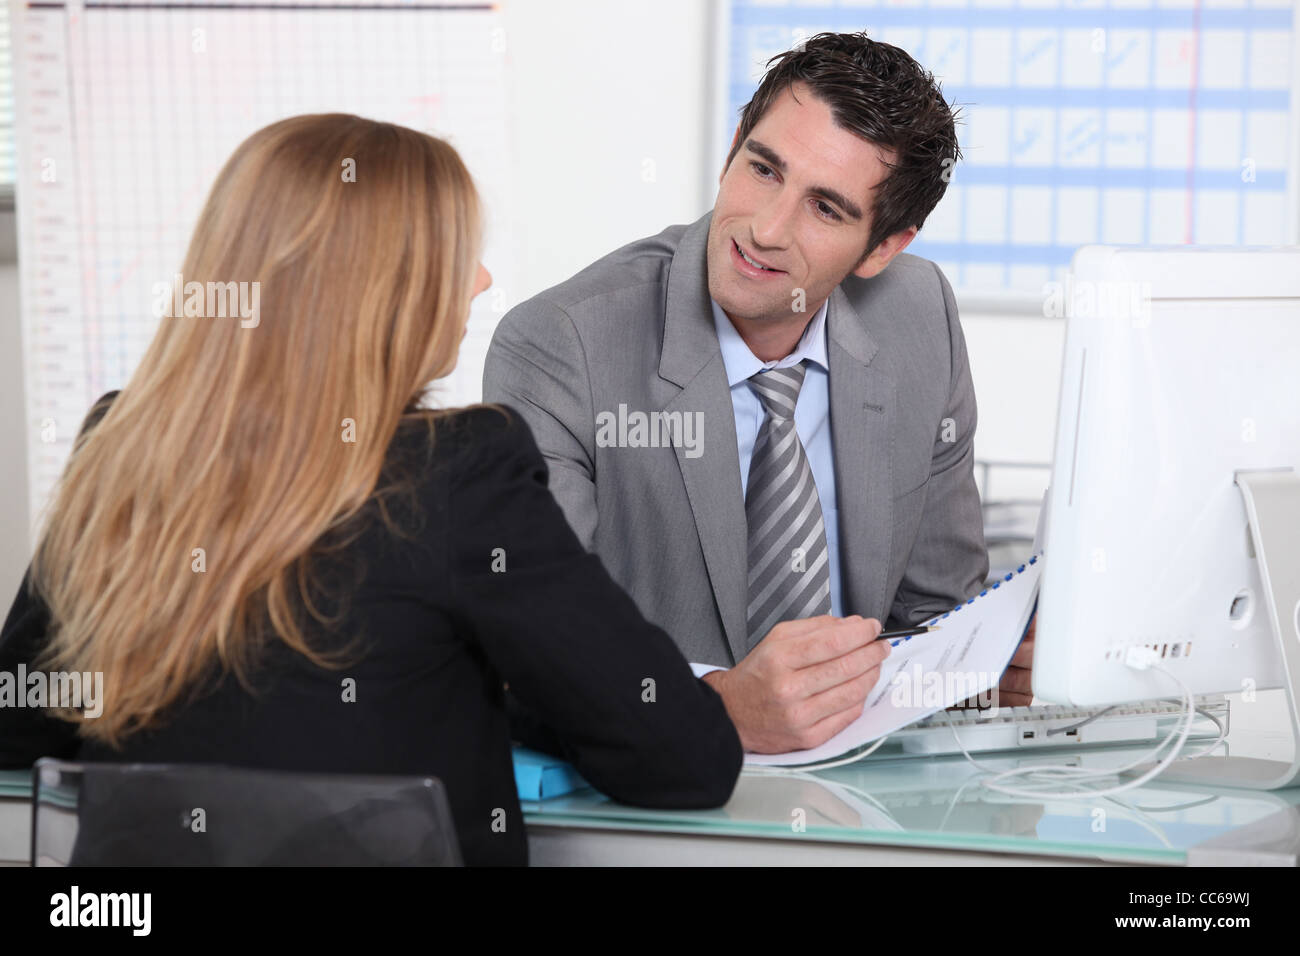 Man interviewing a young woman across a desk Stock Photo